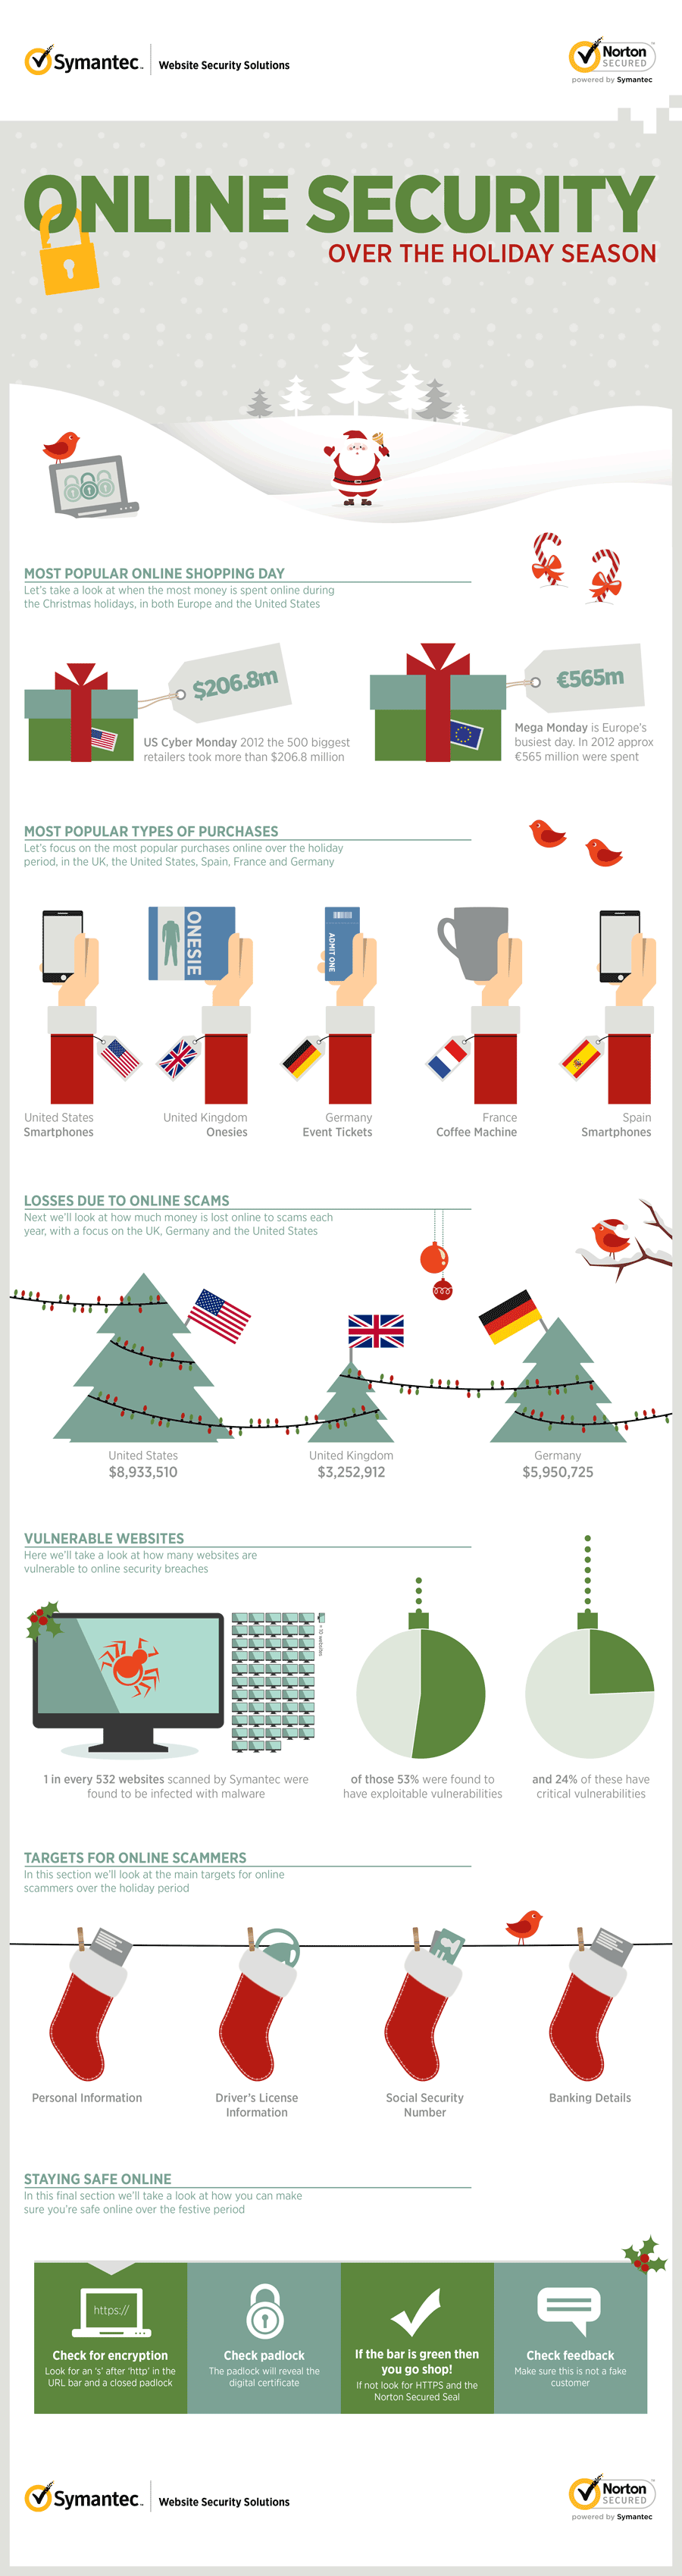 Online Security Over the Holiday Season Infographic